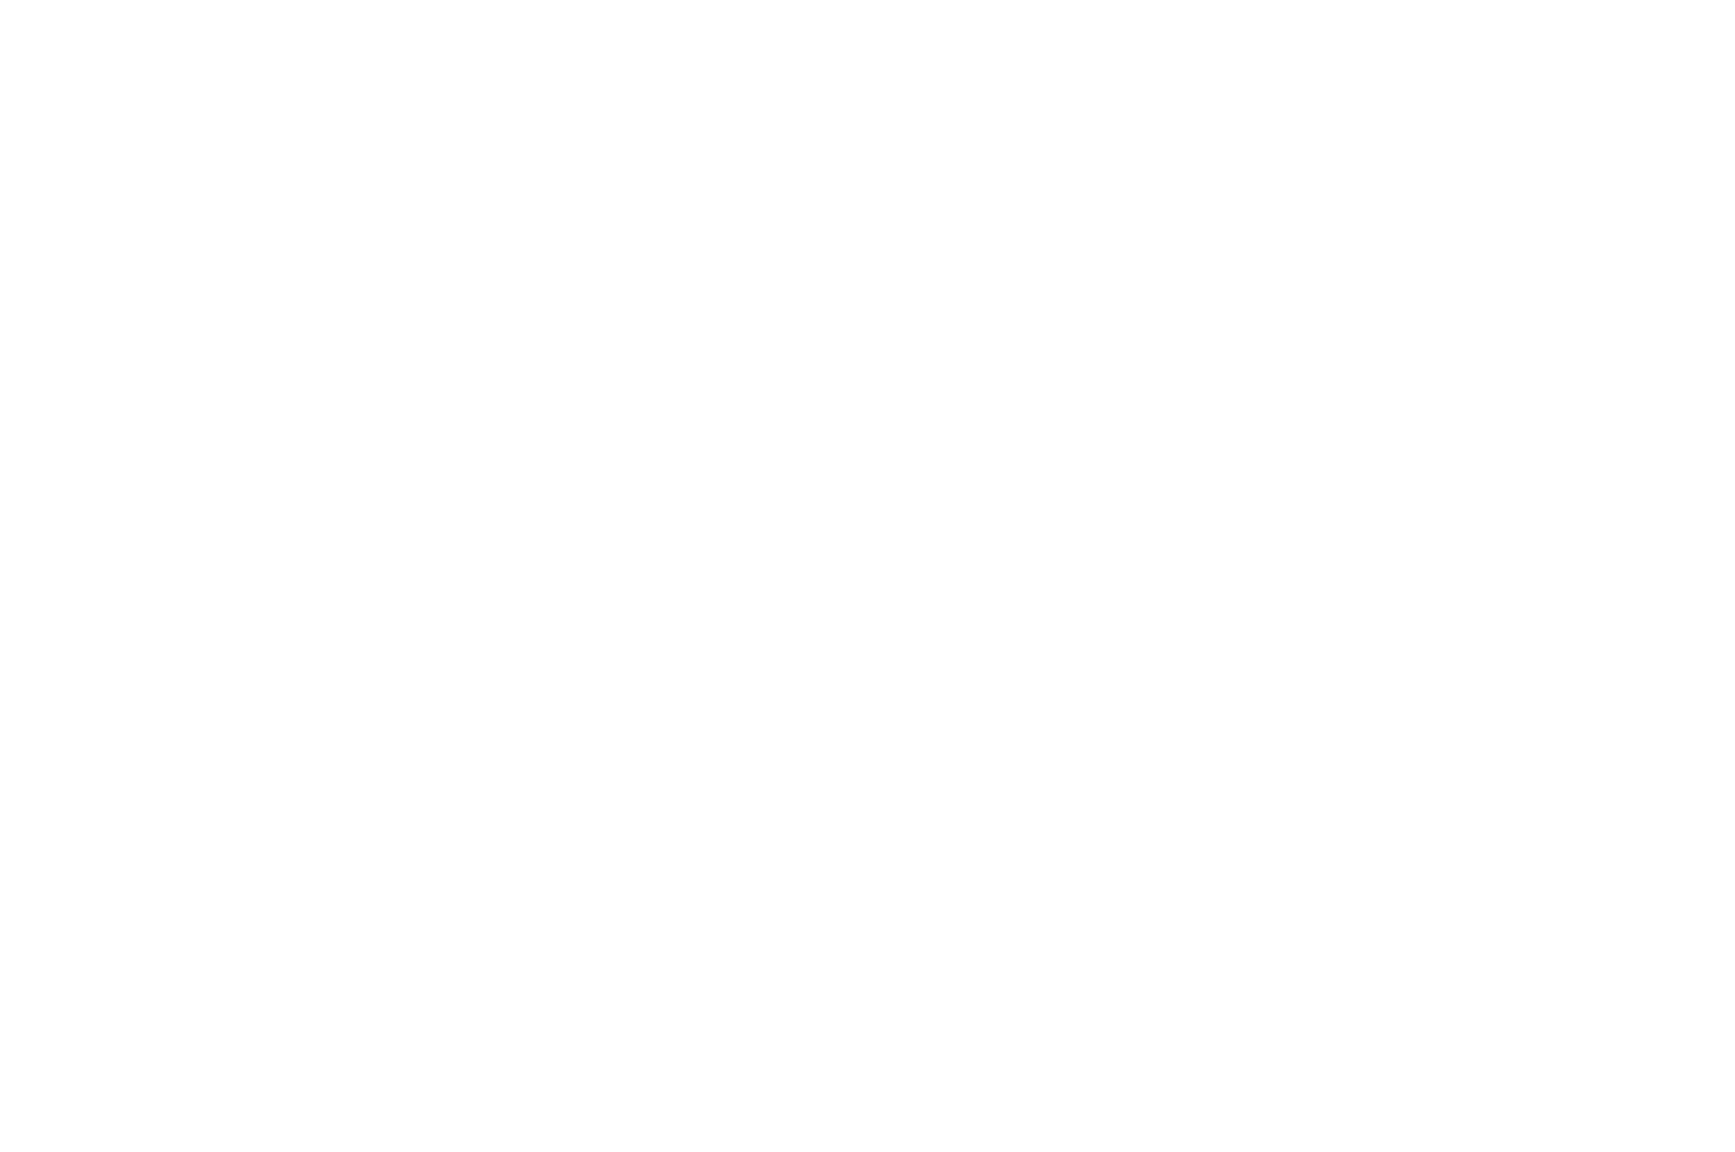 OFFICIAL SELECTION - The Macoproject Film Festival - 2021 copy.png